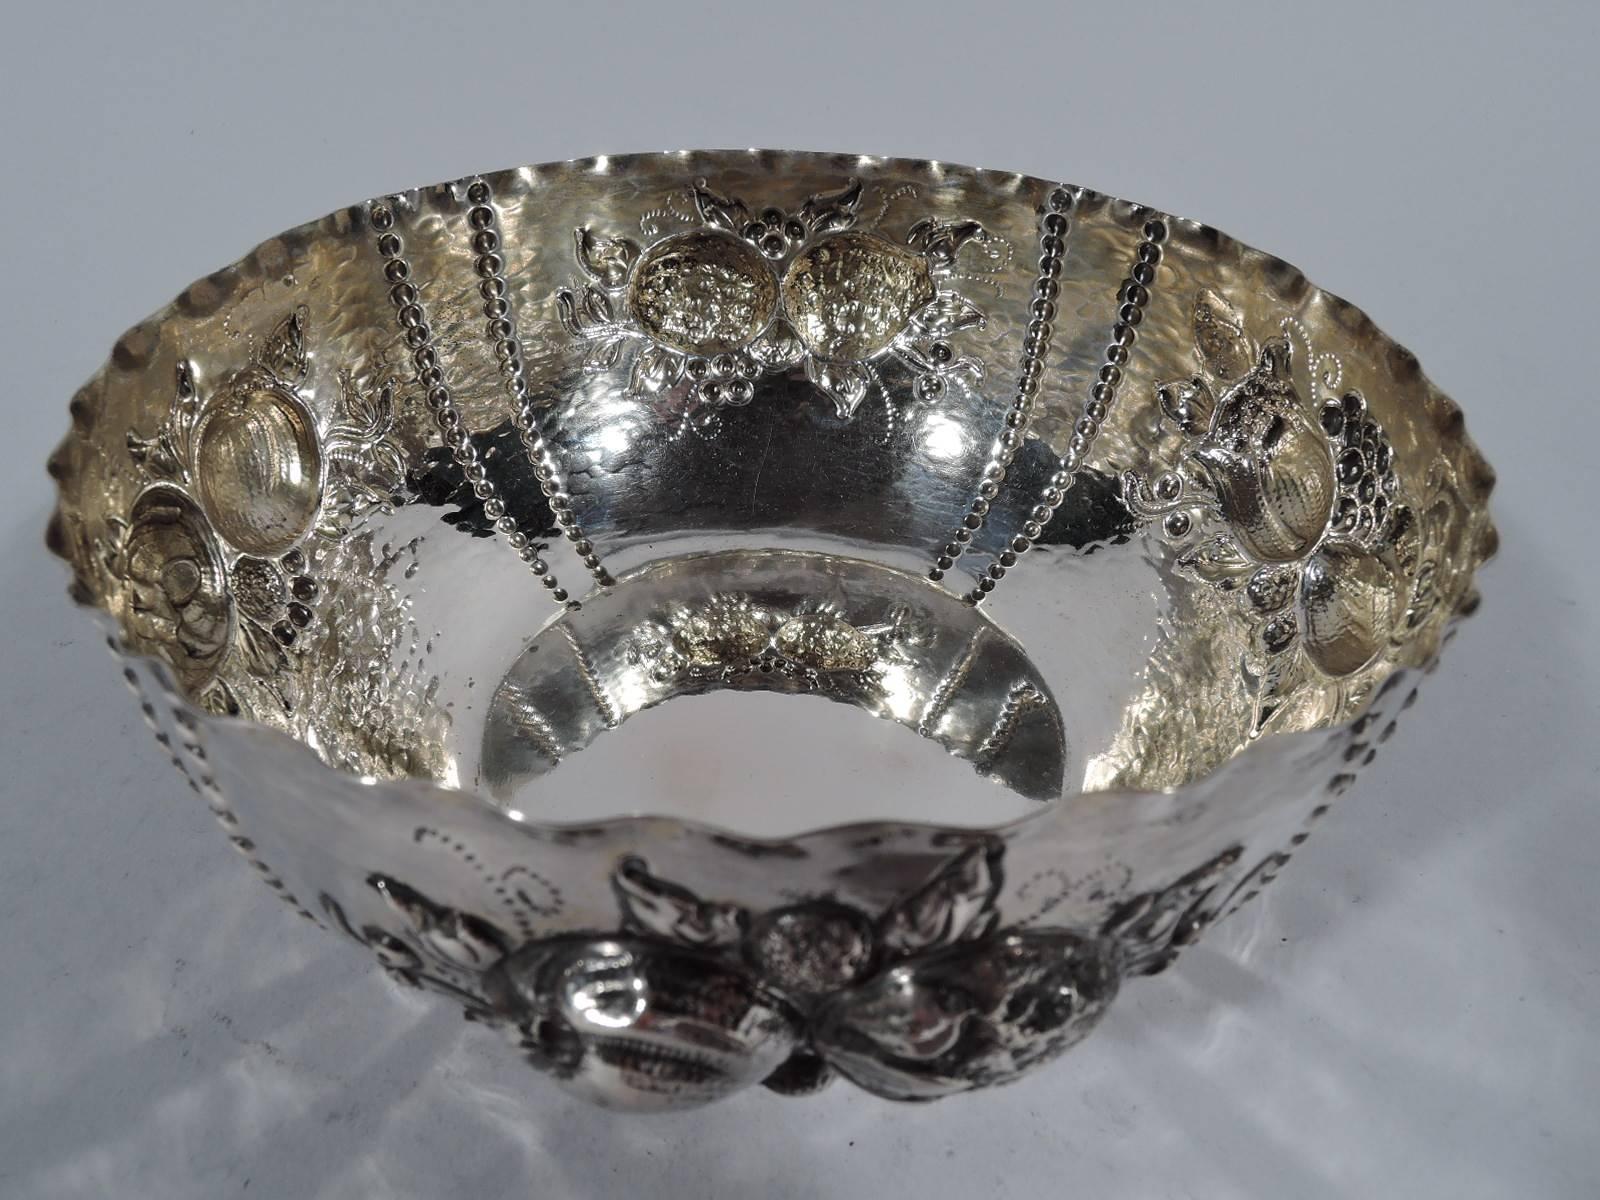 Country Antique Swedish Silver Naïve Bowl with Fruits by CG Hallberg